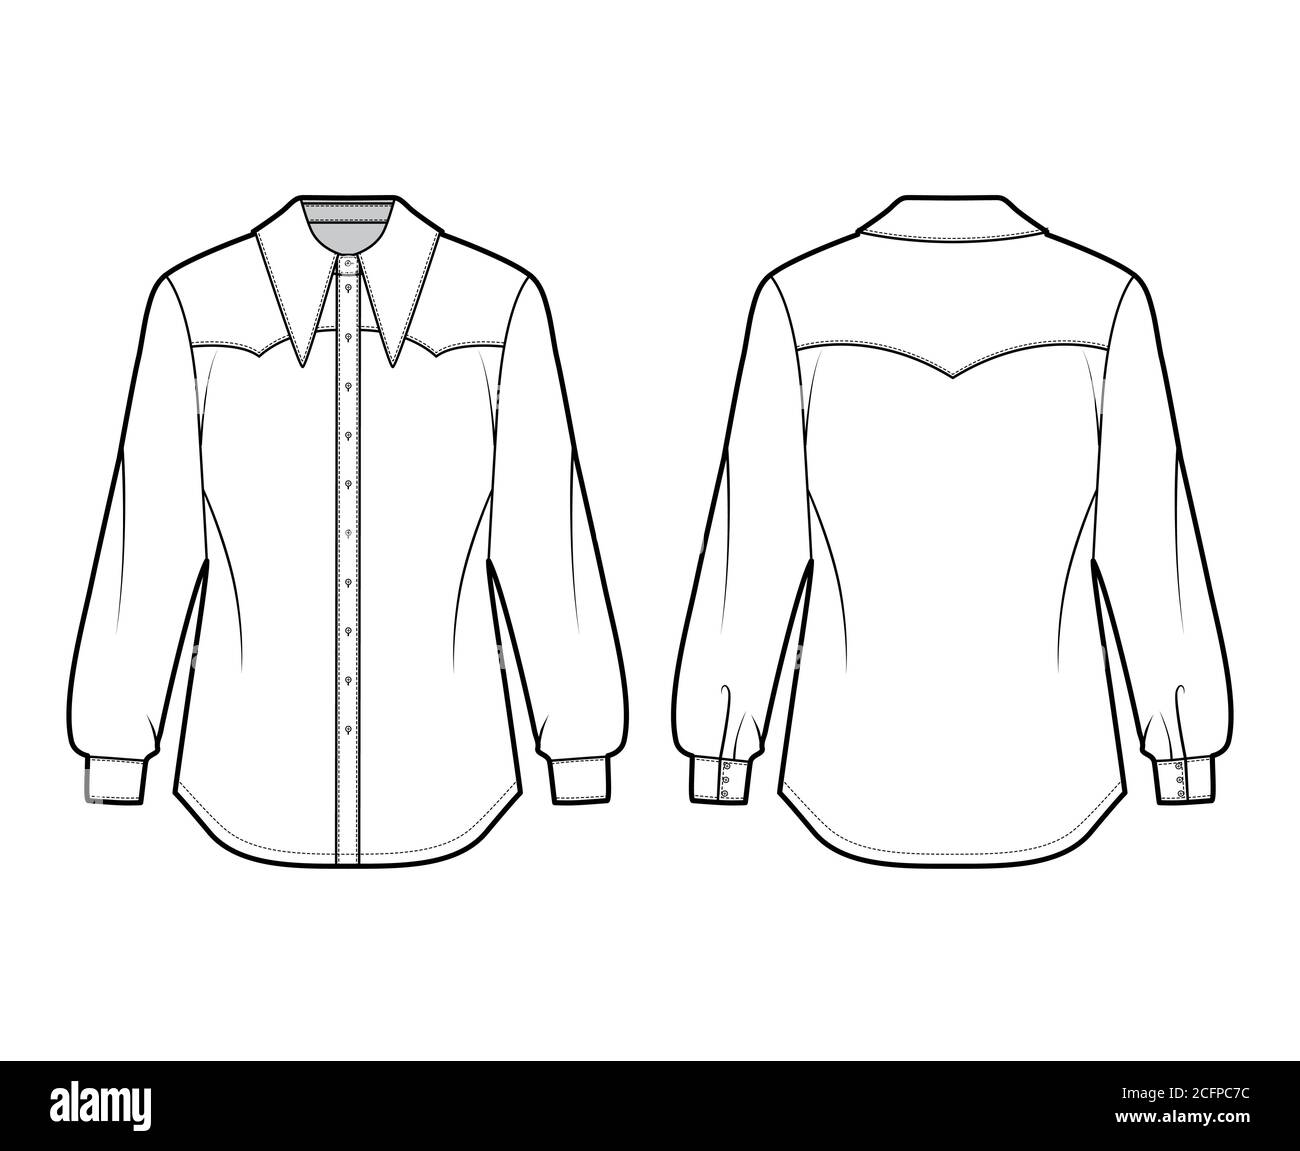 Western-inspired shirt technical fashion illustration with long sleeves ...